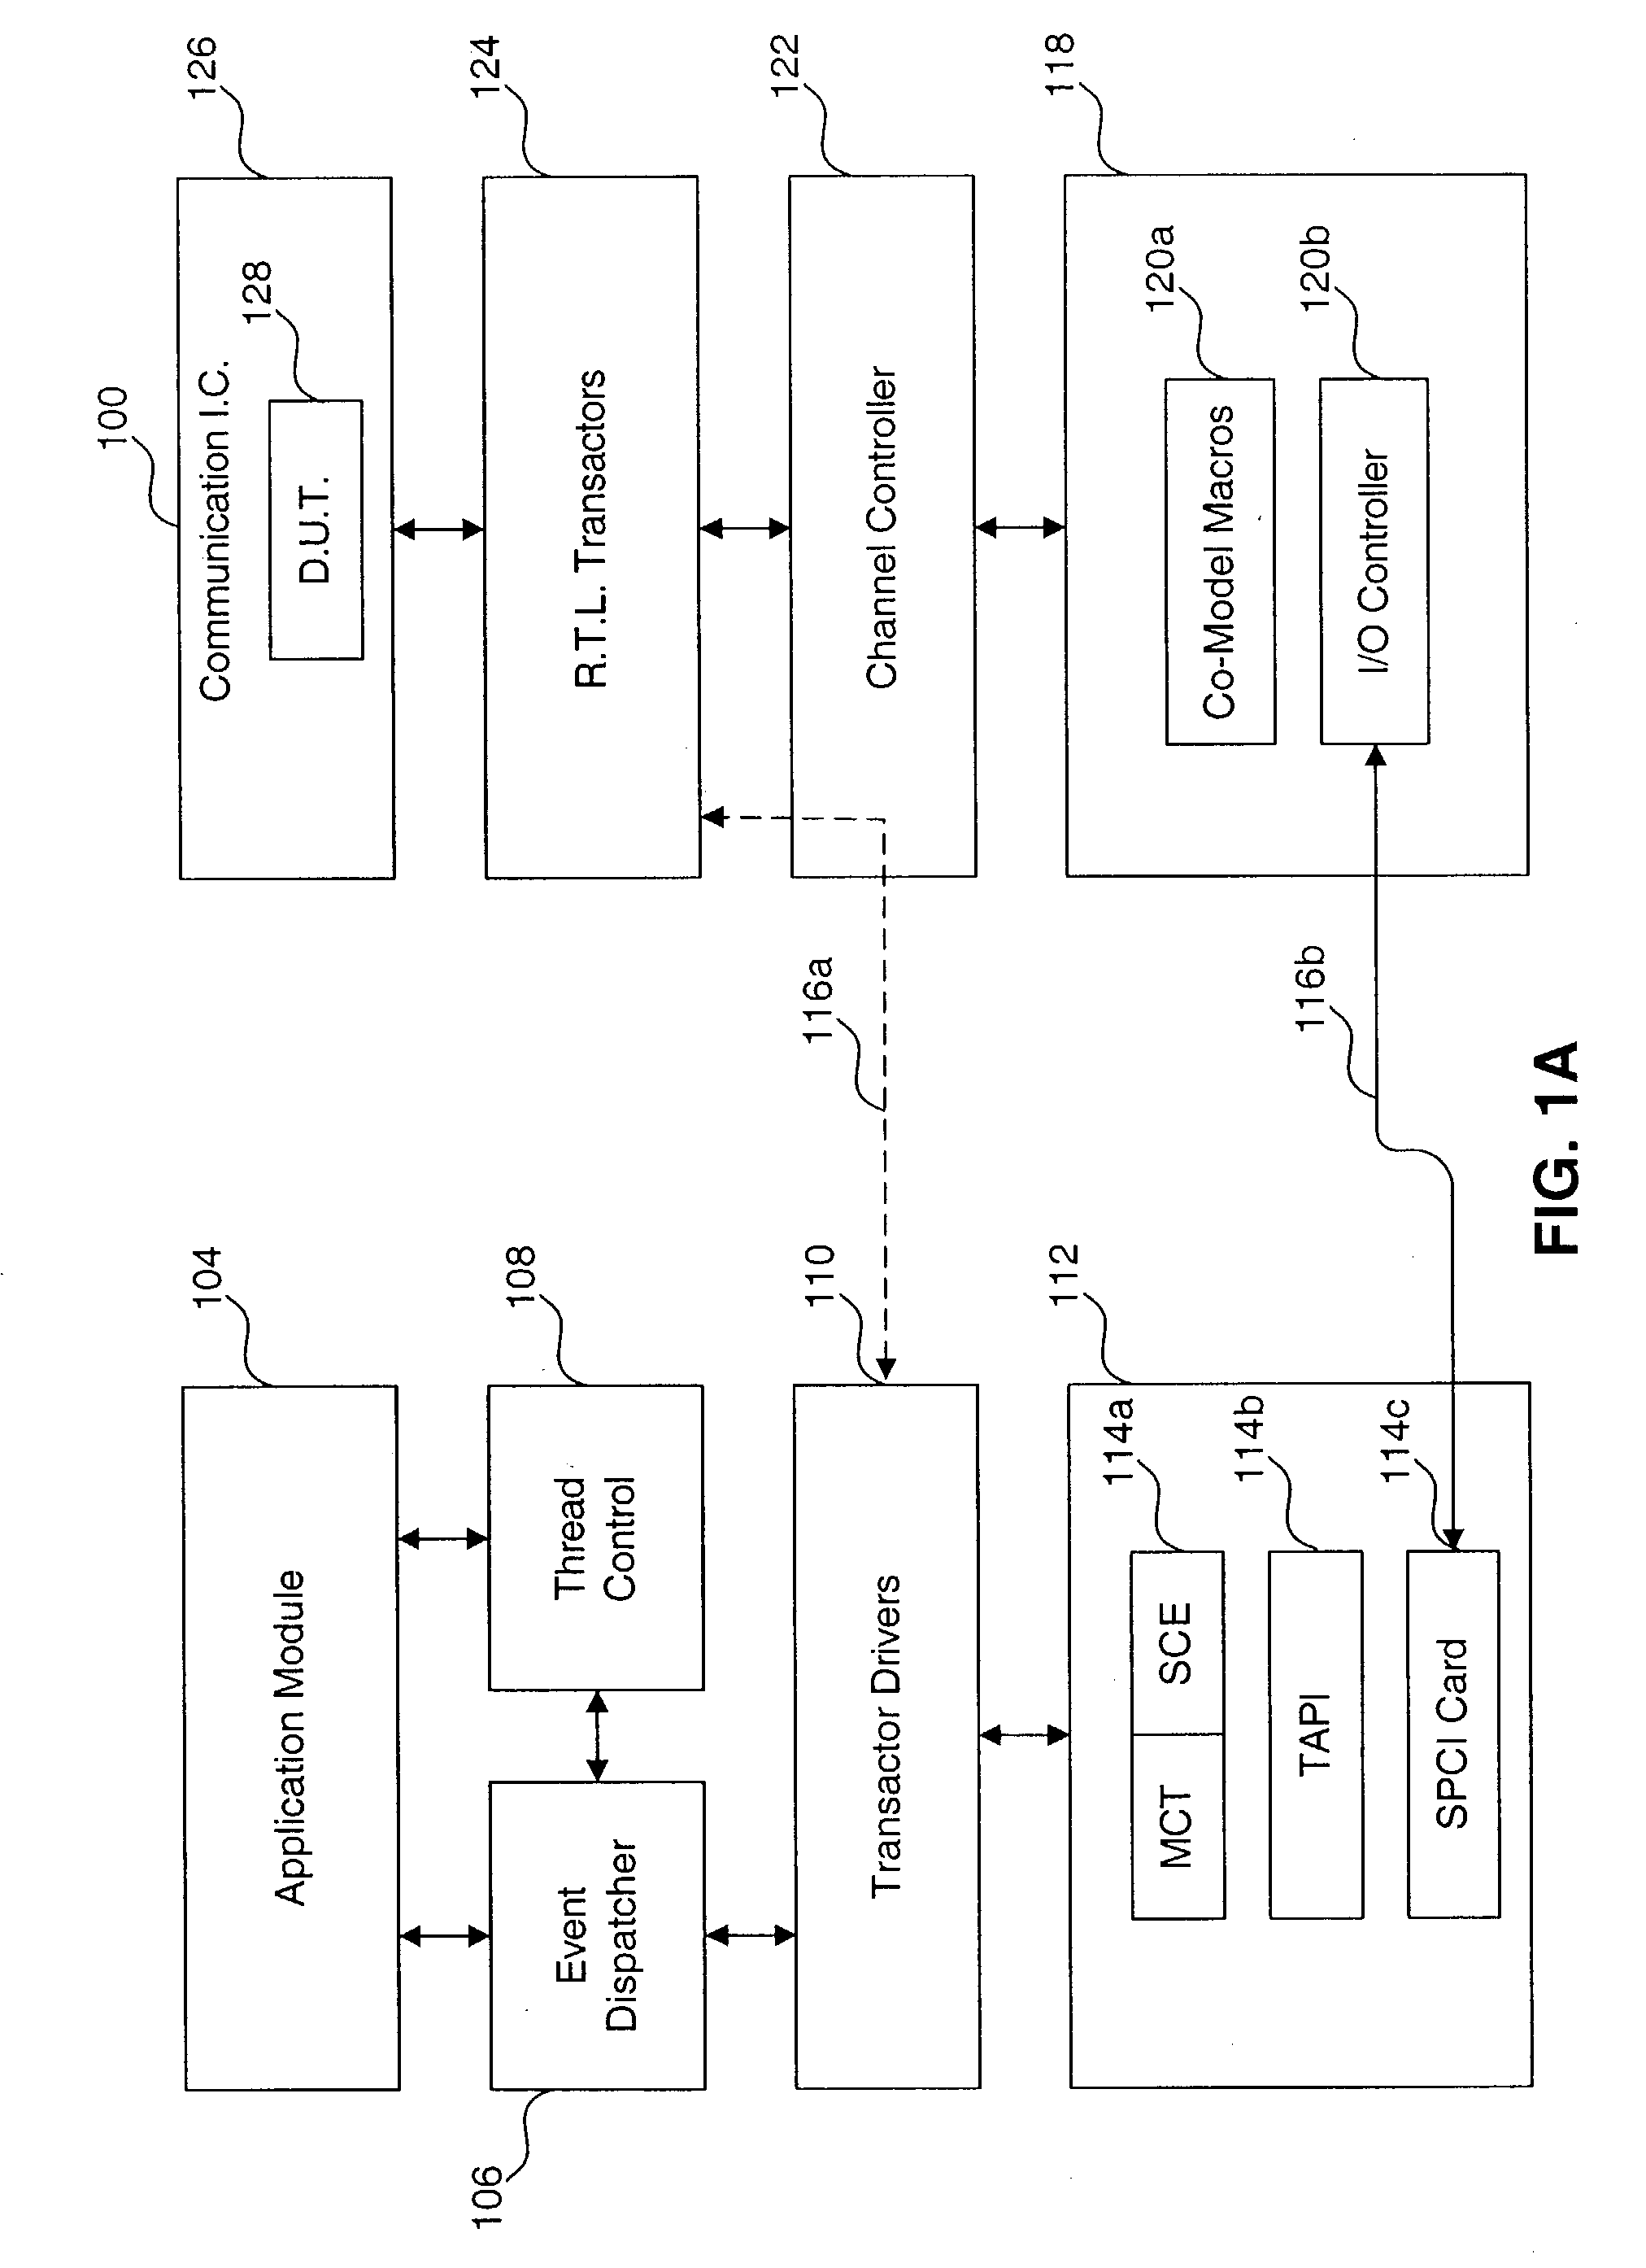 Method and system for deterministic control of an emulation